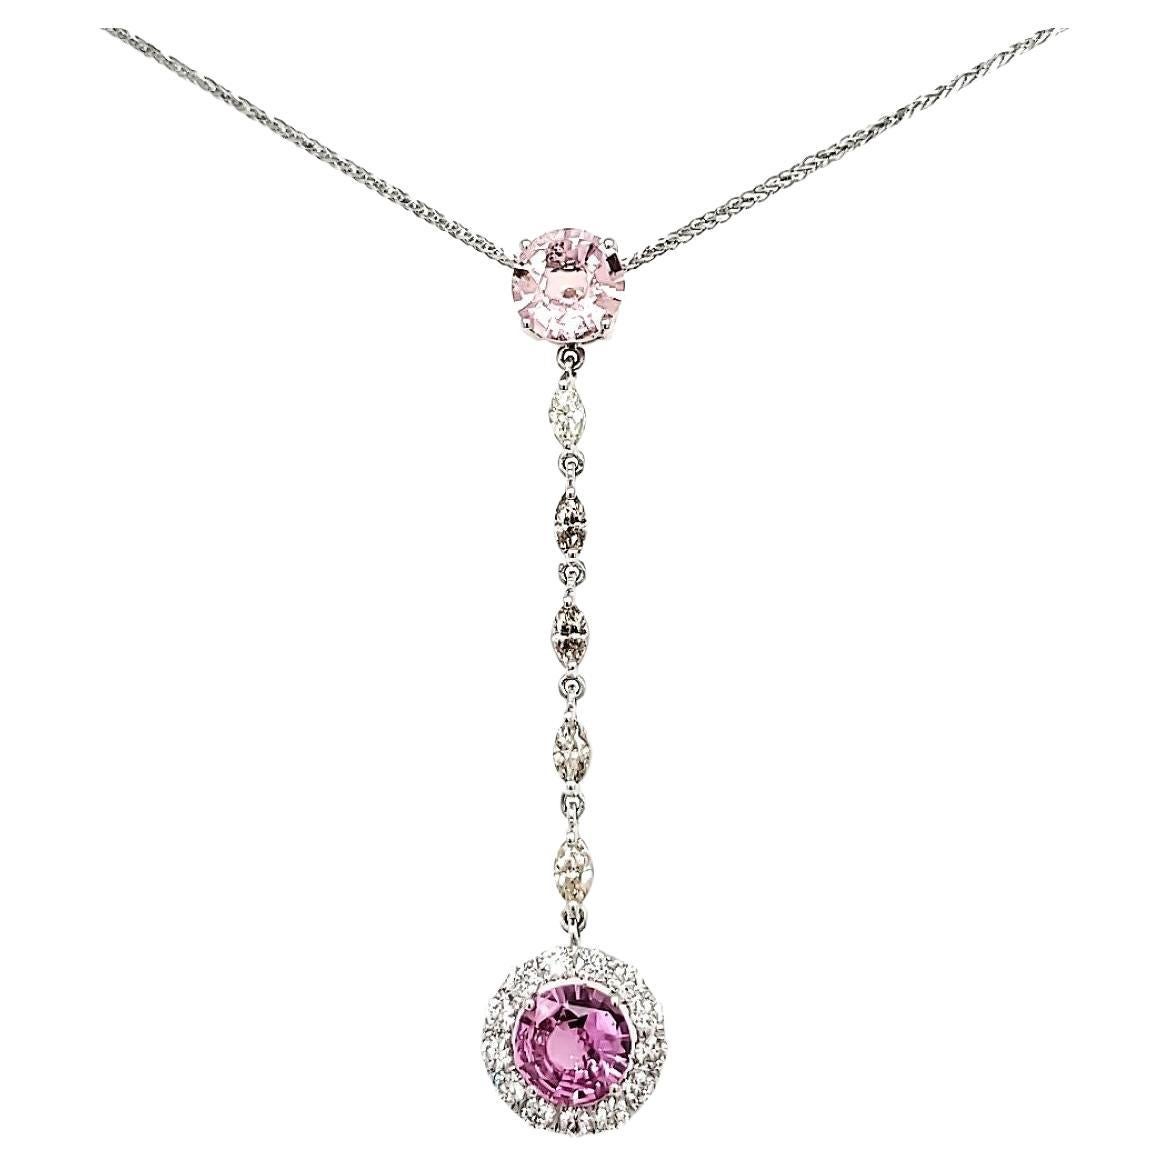 Pink Sapphire Cts 2.44 and Marquise Diamond Cts 0.42 Drop Pendant Necklace For Sale